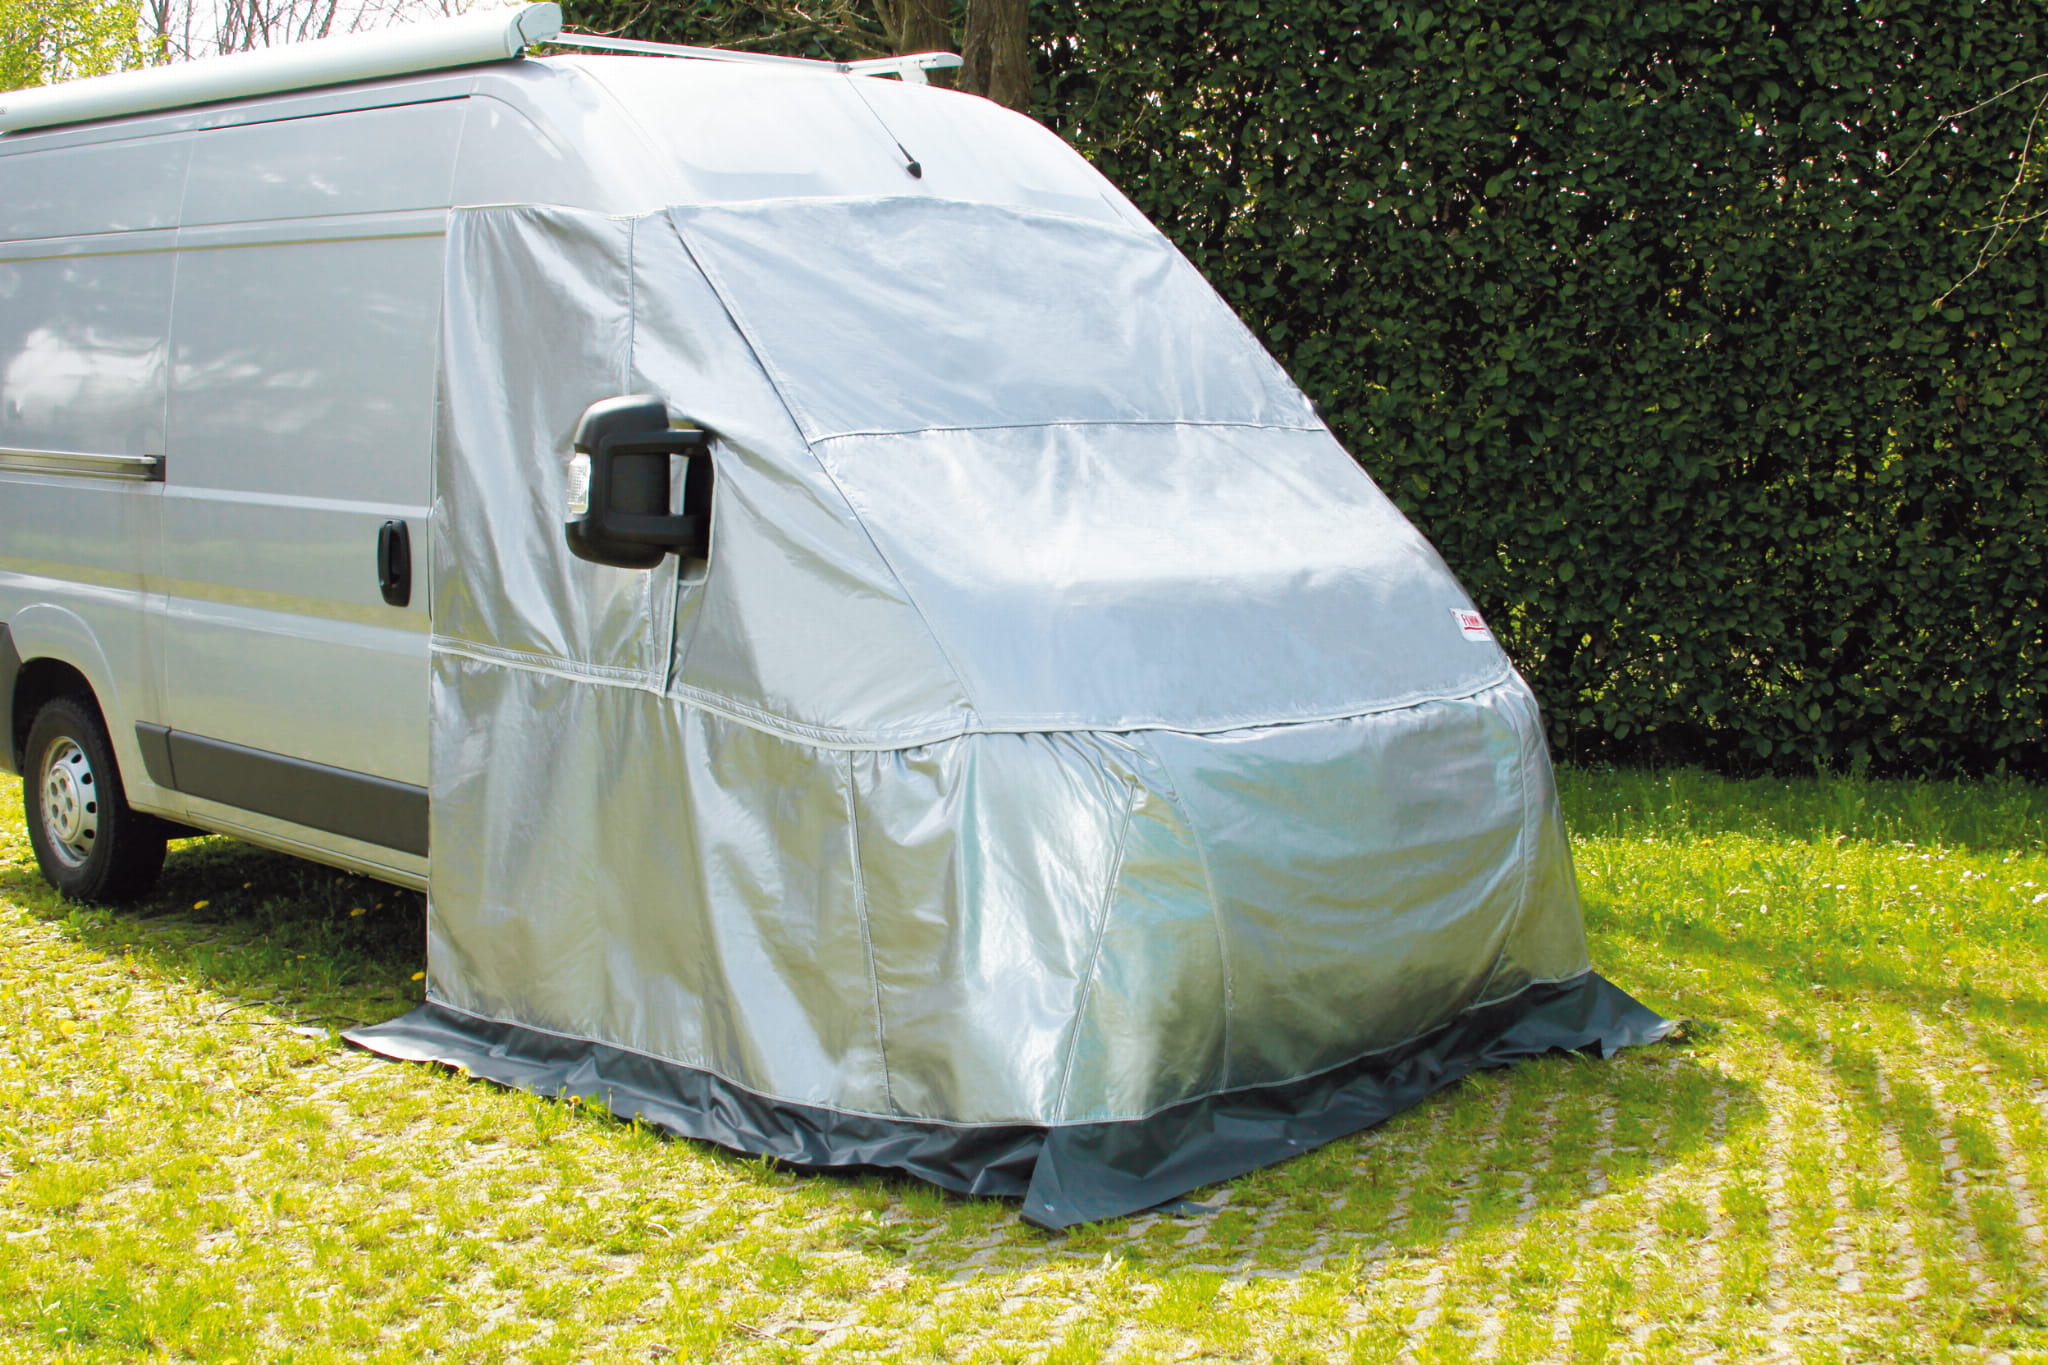 Be ready for the cold - a review of caravanning accessories – image 9